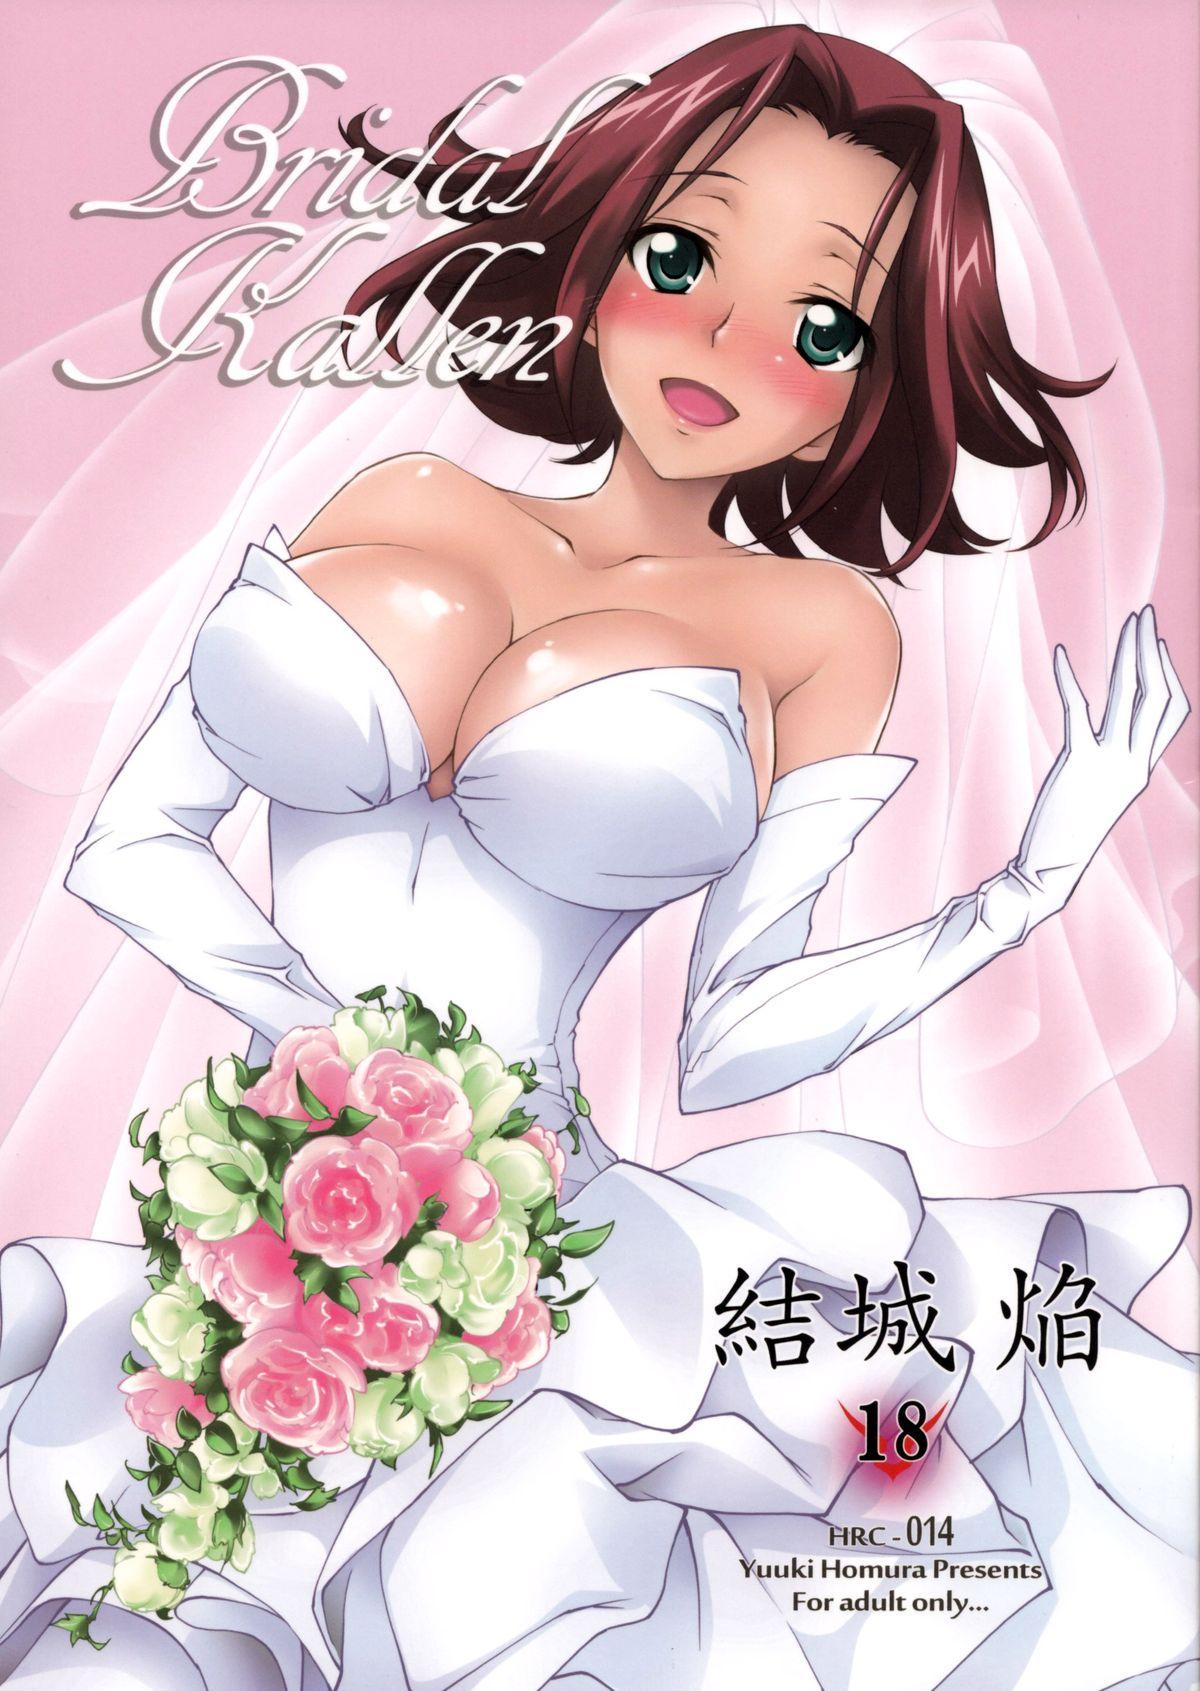 Doggy Style BRIDAL KALLEN - Code geass The - Page 2